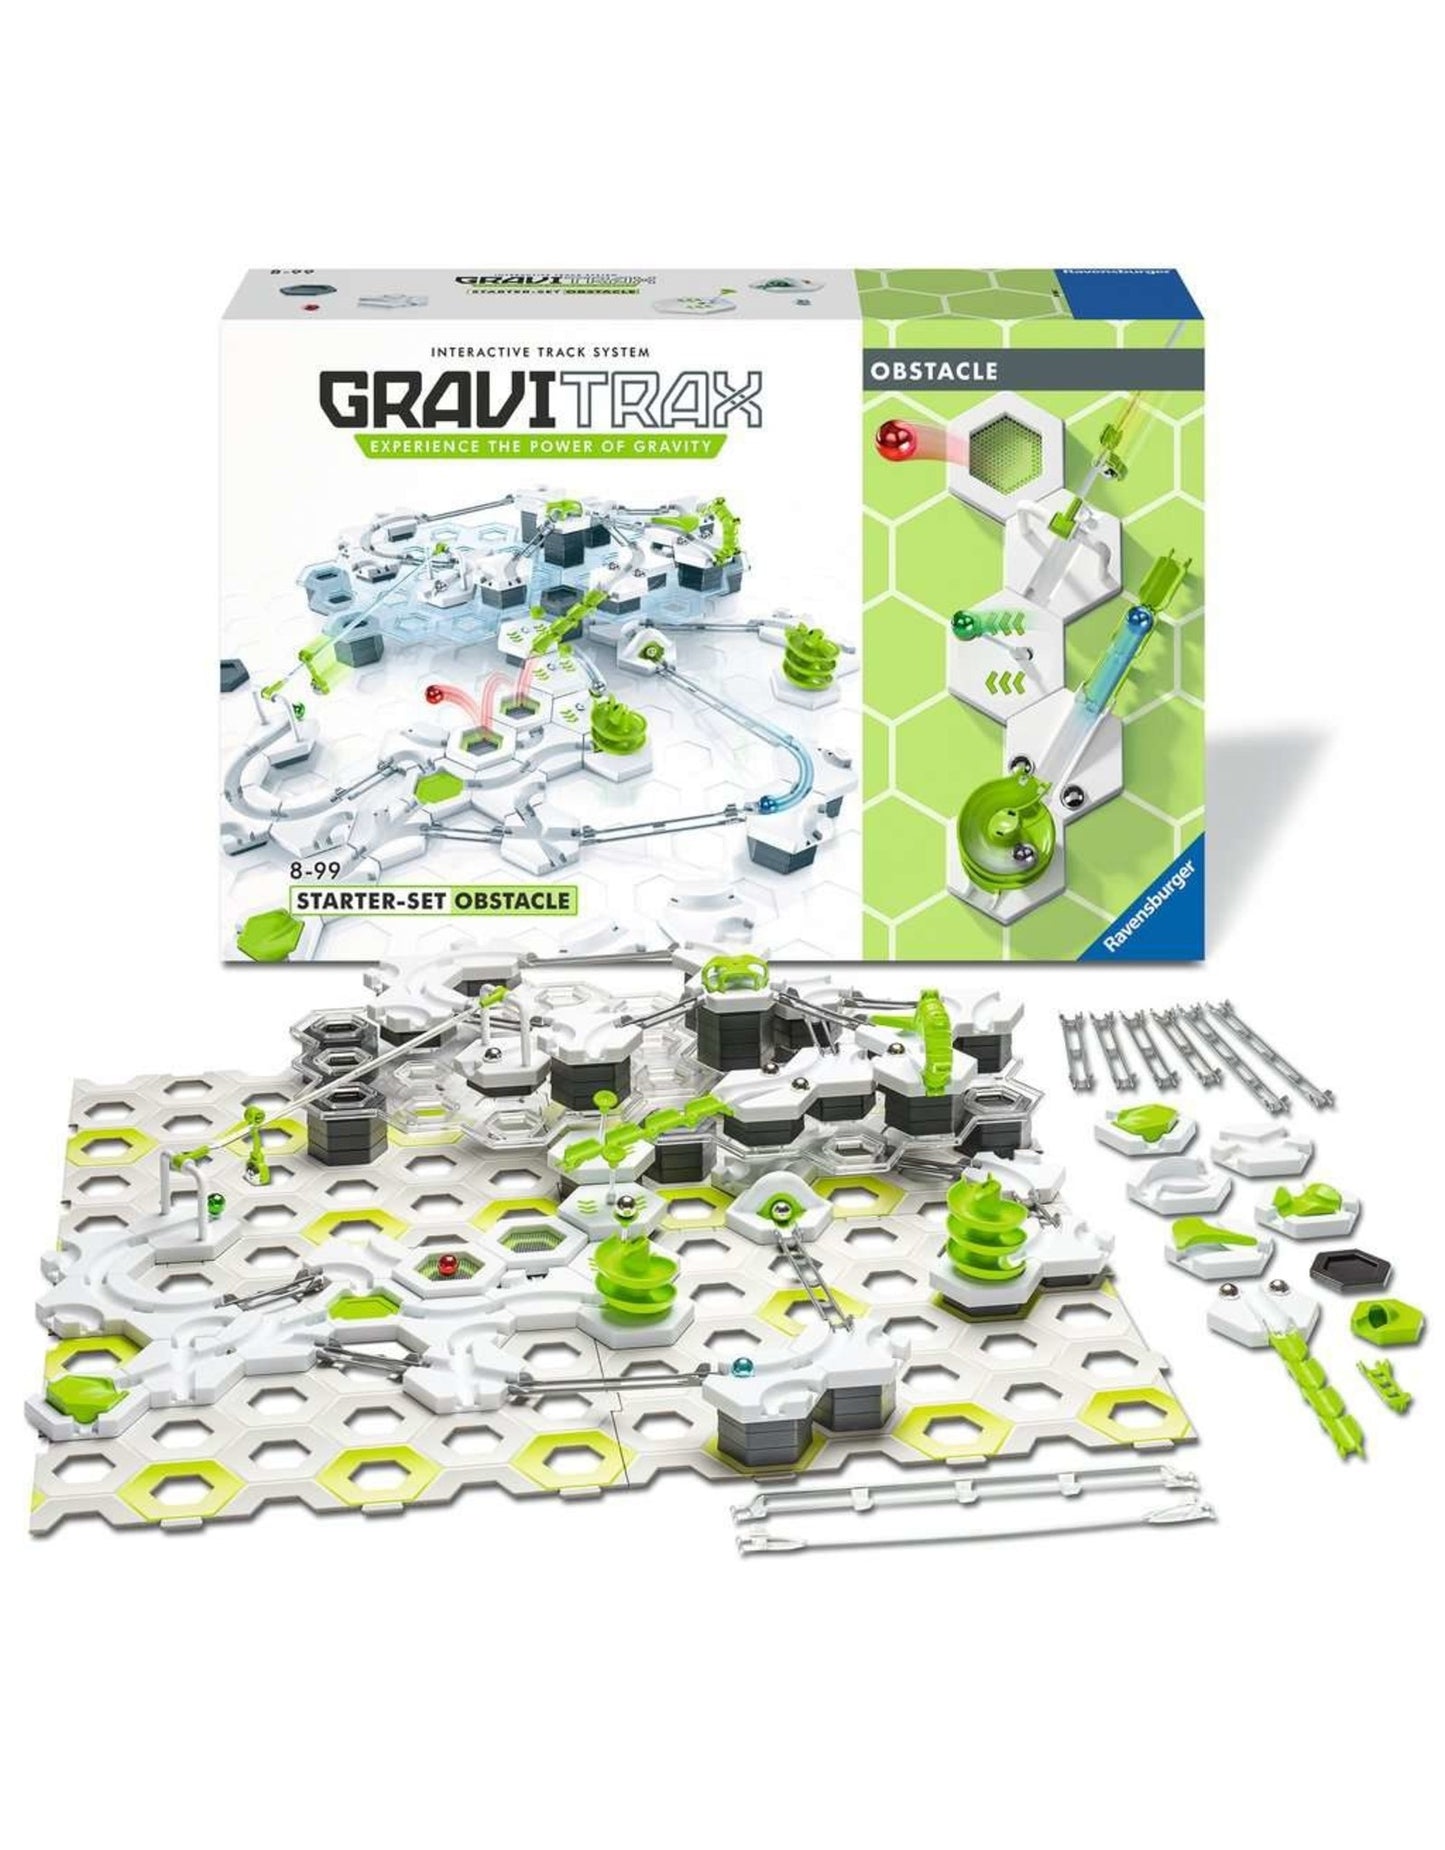 Gravitrax Set: Obstacle 186pc